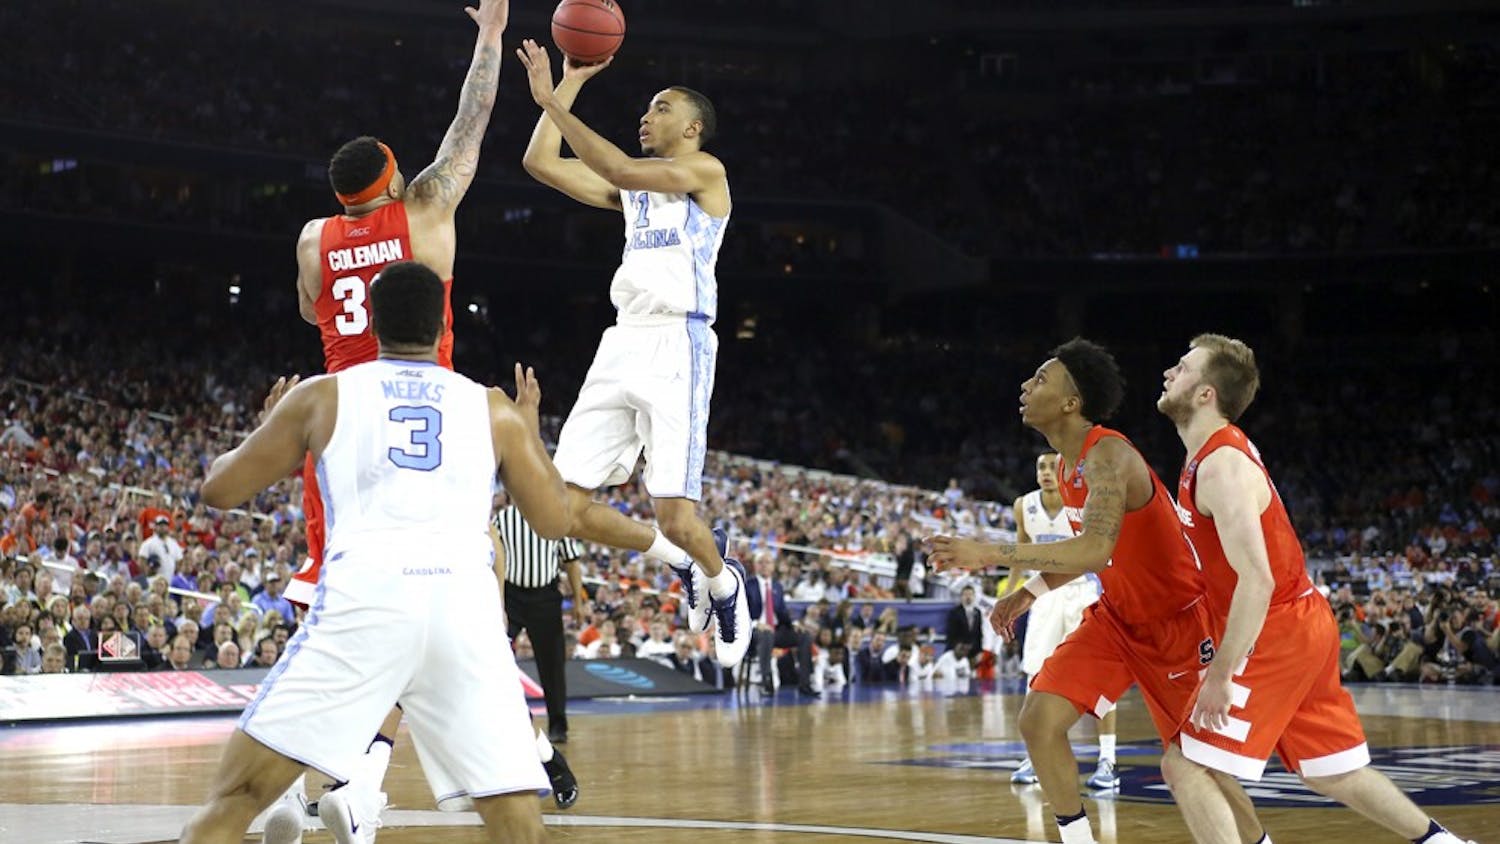 UNC forward Brice Johnson (11) takes a shot against Syracuse in the semi-finals of the NCAA Tournament. UNC took the victory with a score of 83 - 66.